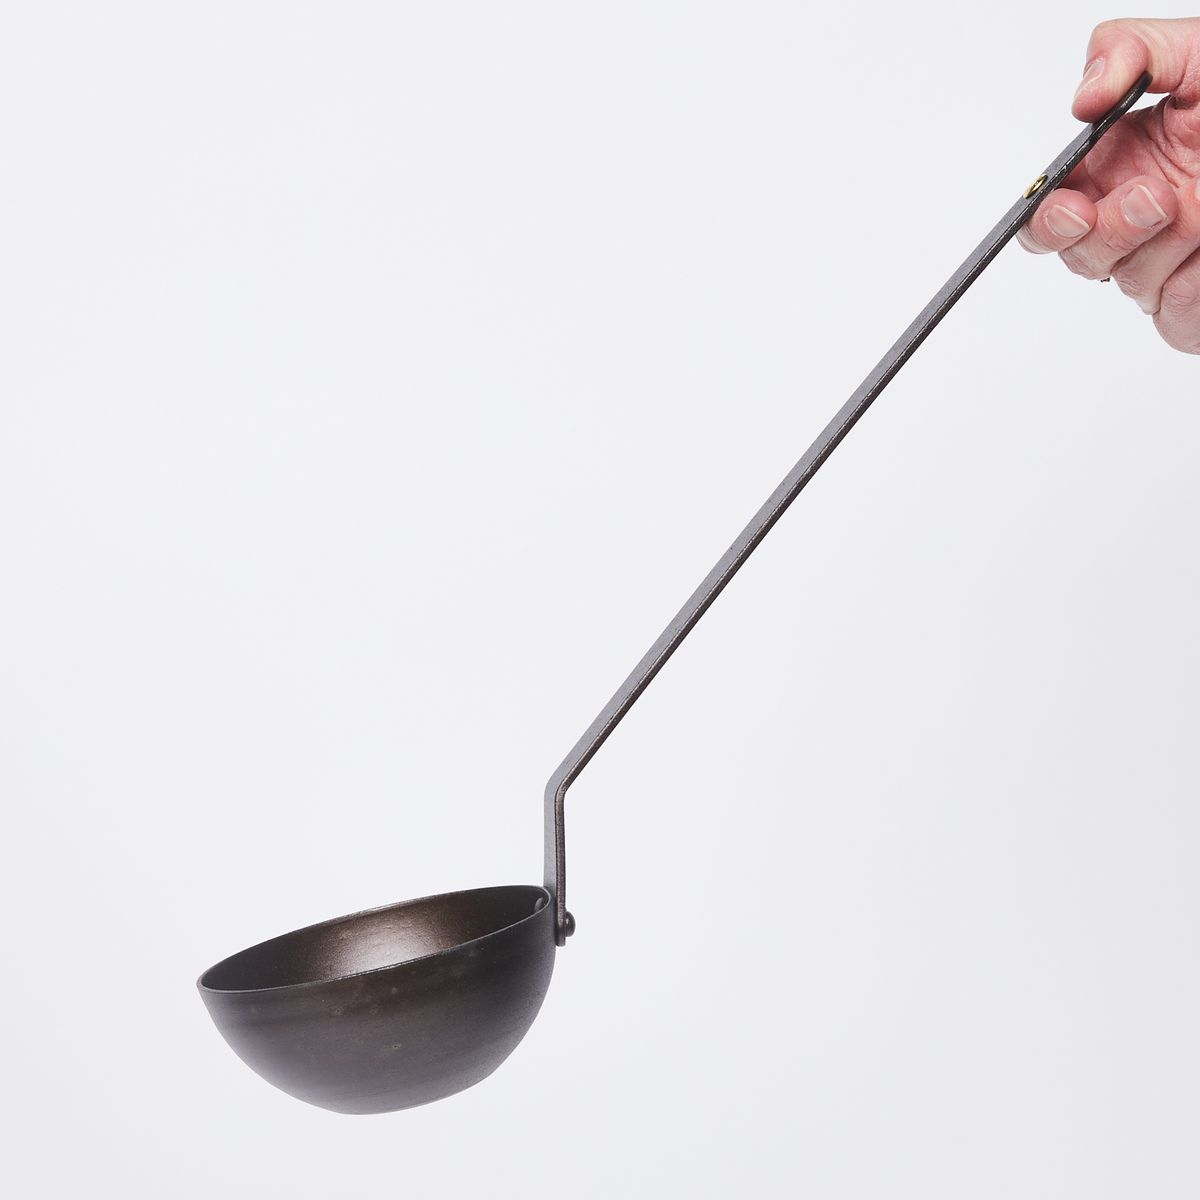 Hand holding a black metal ladle at the top of the handle in the upper right in the frame